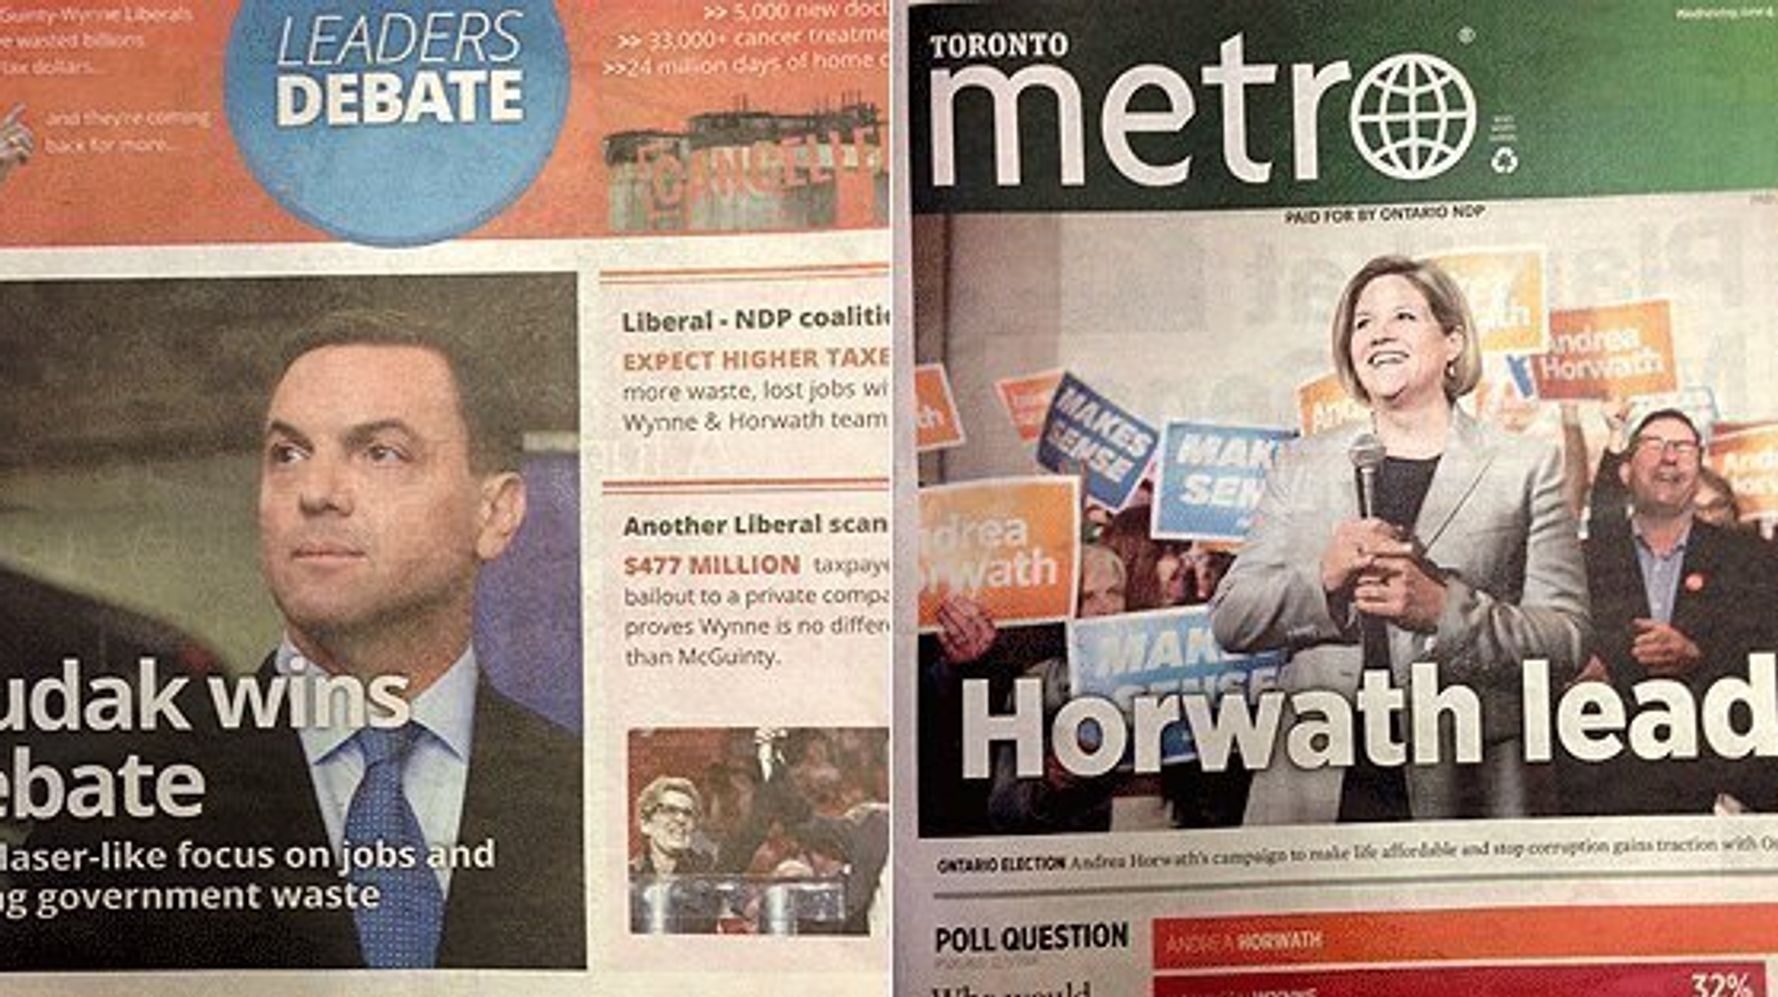 Ontario PCs, NDP Buy Front Page Newspaper Ads For Morning After Debate | HuffPost Politics